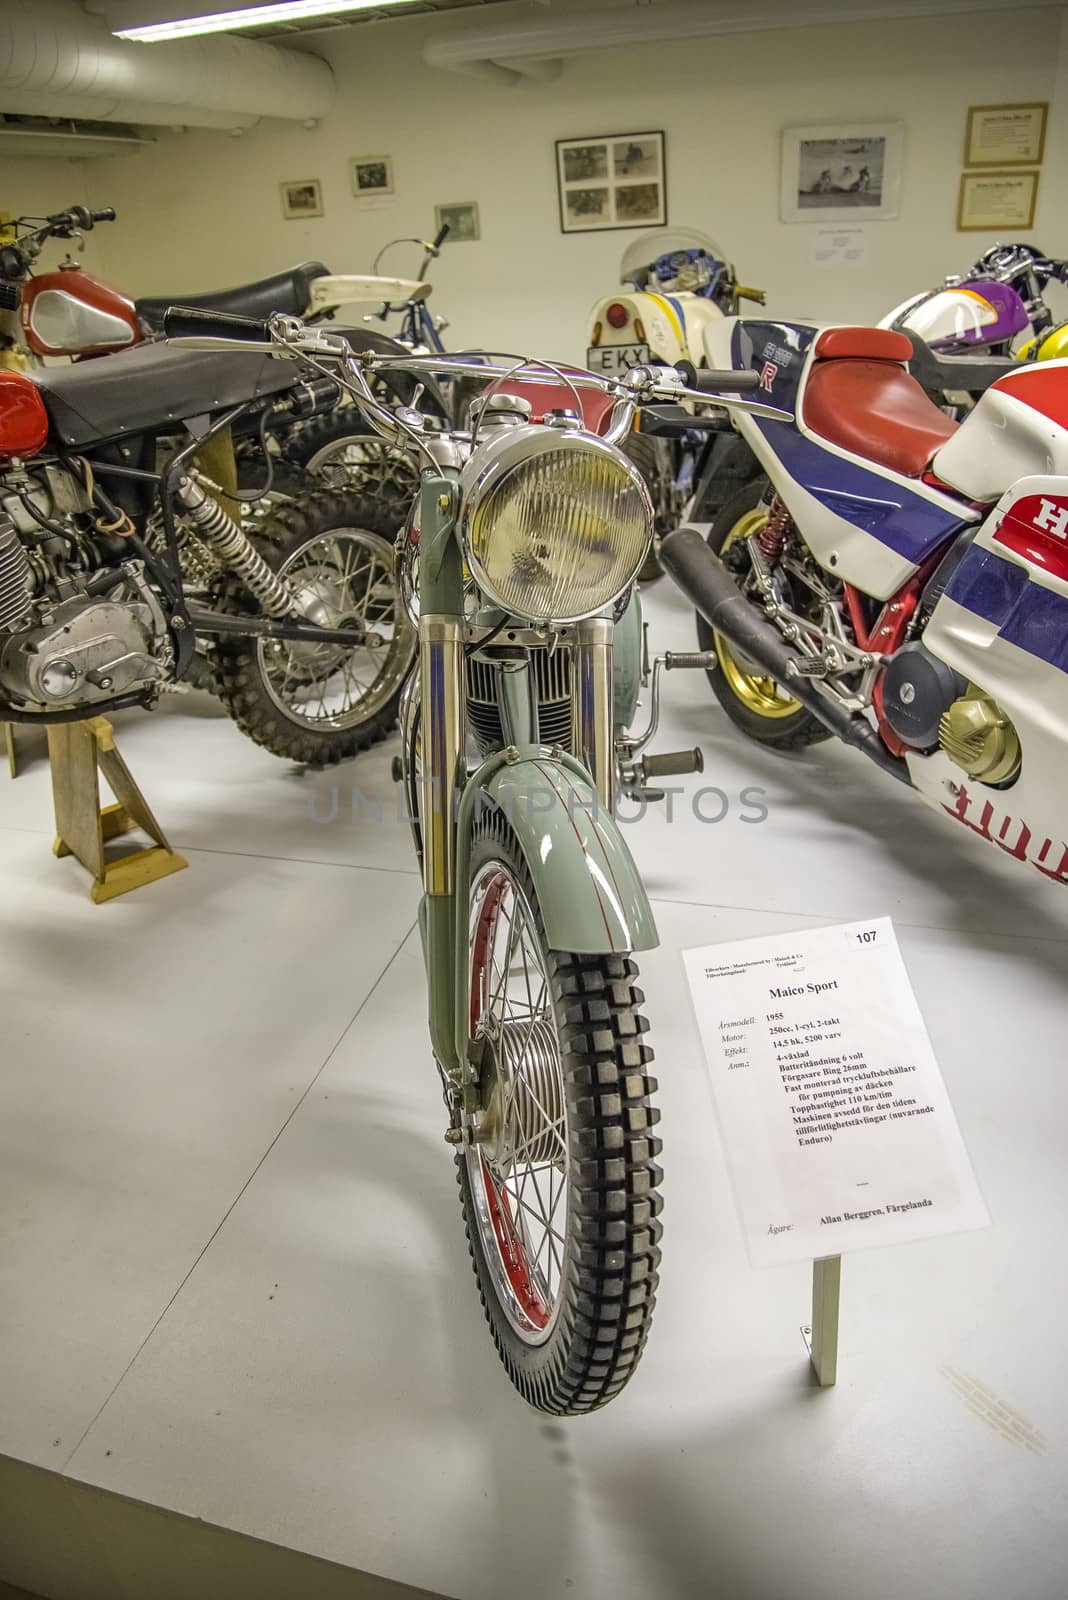 1955 Maico Sport, Germany. Engine: 250cc 1 cyl, 2-stroke, 14.5 hp, 5200 rpm, 4 gear. Top speed 110 km / per hour. All the pictures are shot on Ed's motorcycle and Motor Museum in Ed, Sweden. Interesting museum, which is worth a visit.